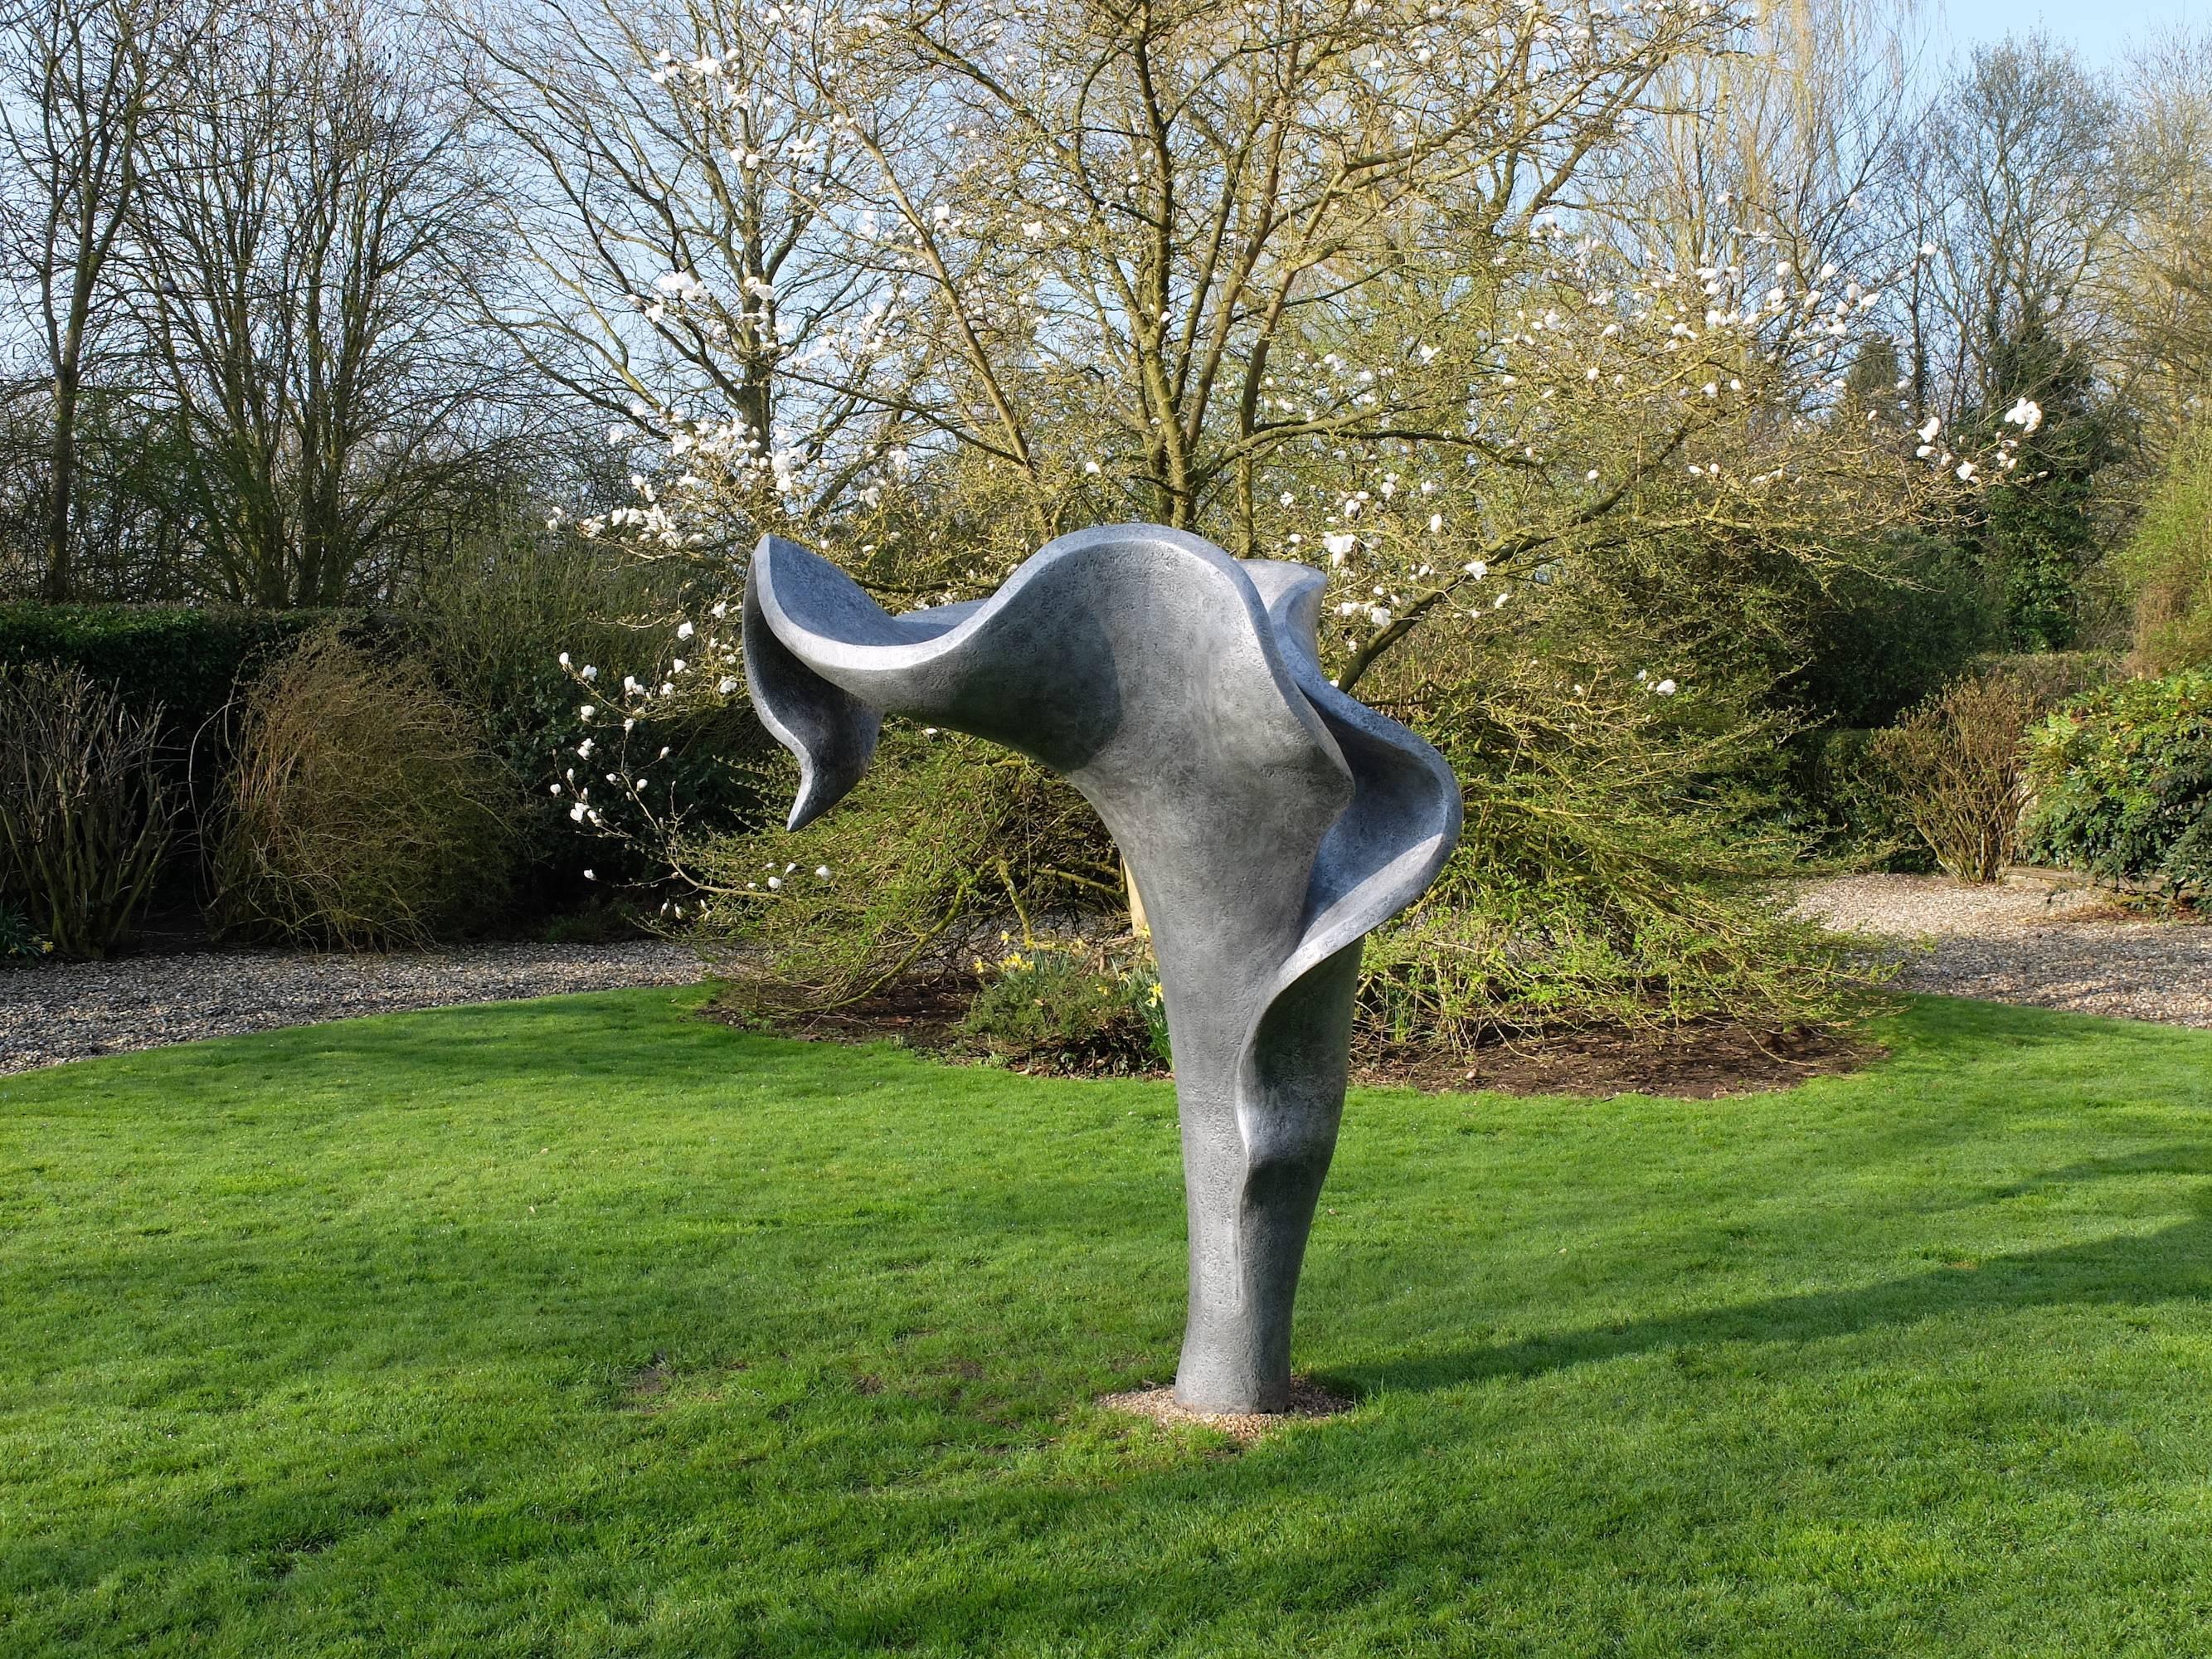 The Dreamer is the new sculpture from Anne Curry, member of the Royal British Society of Sculptors. Her work is in major private collections around the world, from Bangkok to Toronto, the South of France to Los Angeles and has exhibited at the